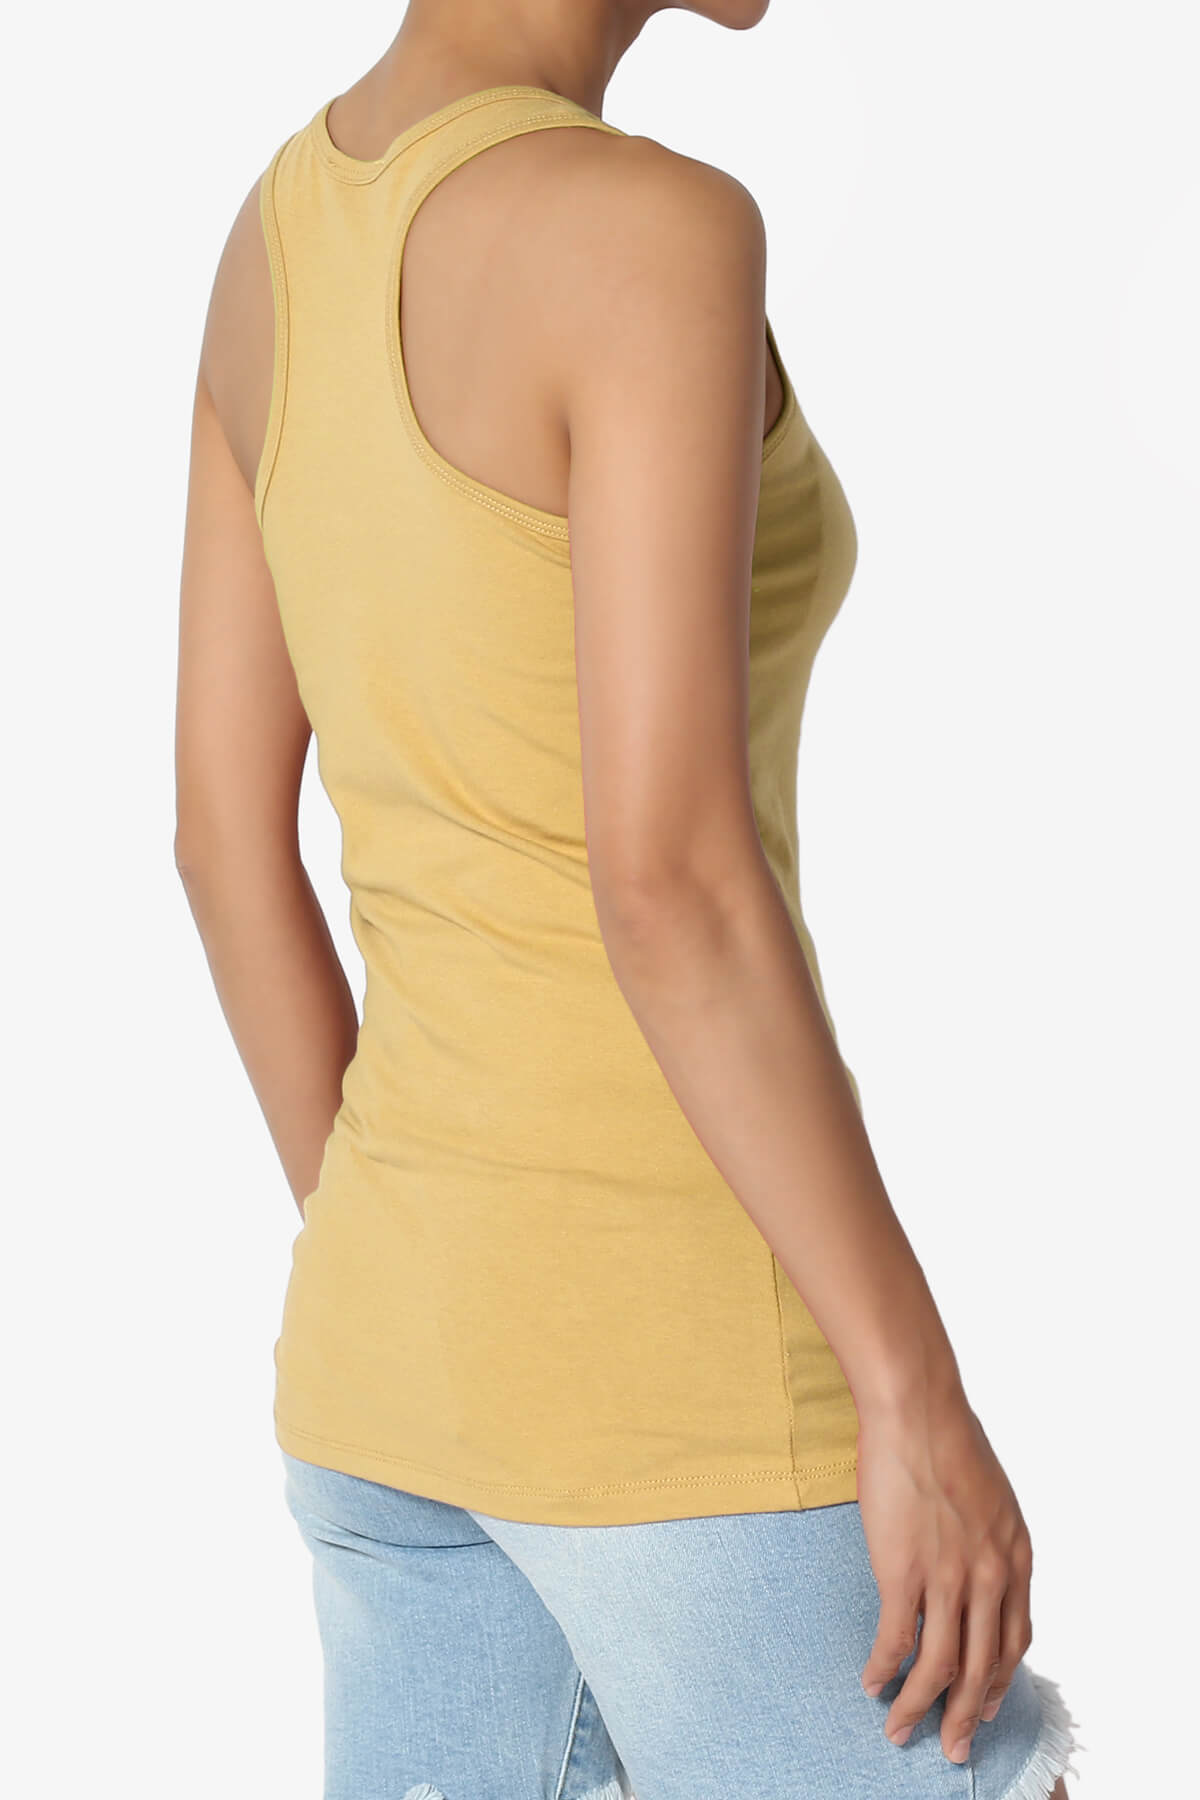 Load image into Gallery viewer, Marnie Racerback Tank Top LIGHT MUSTARD_4
